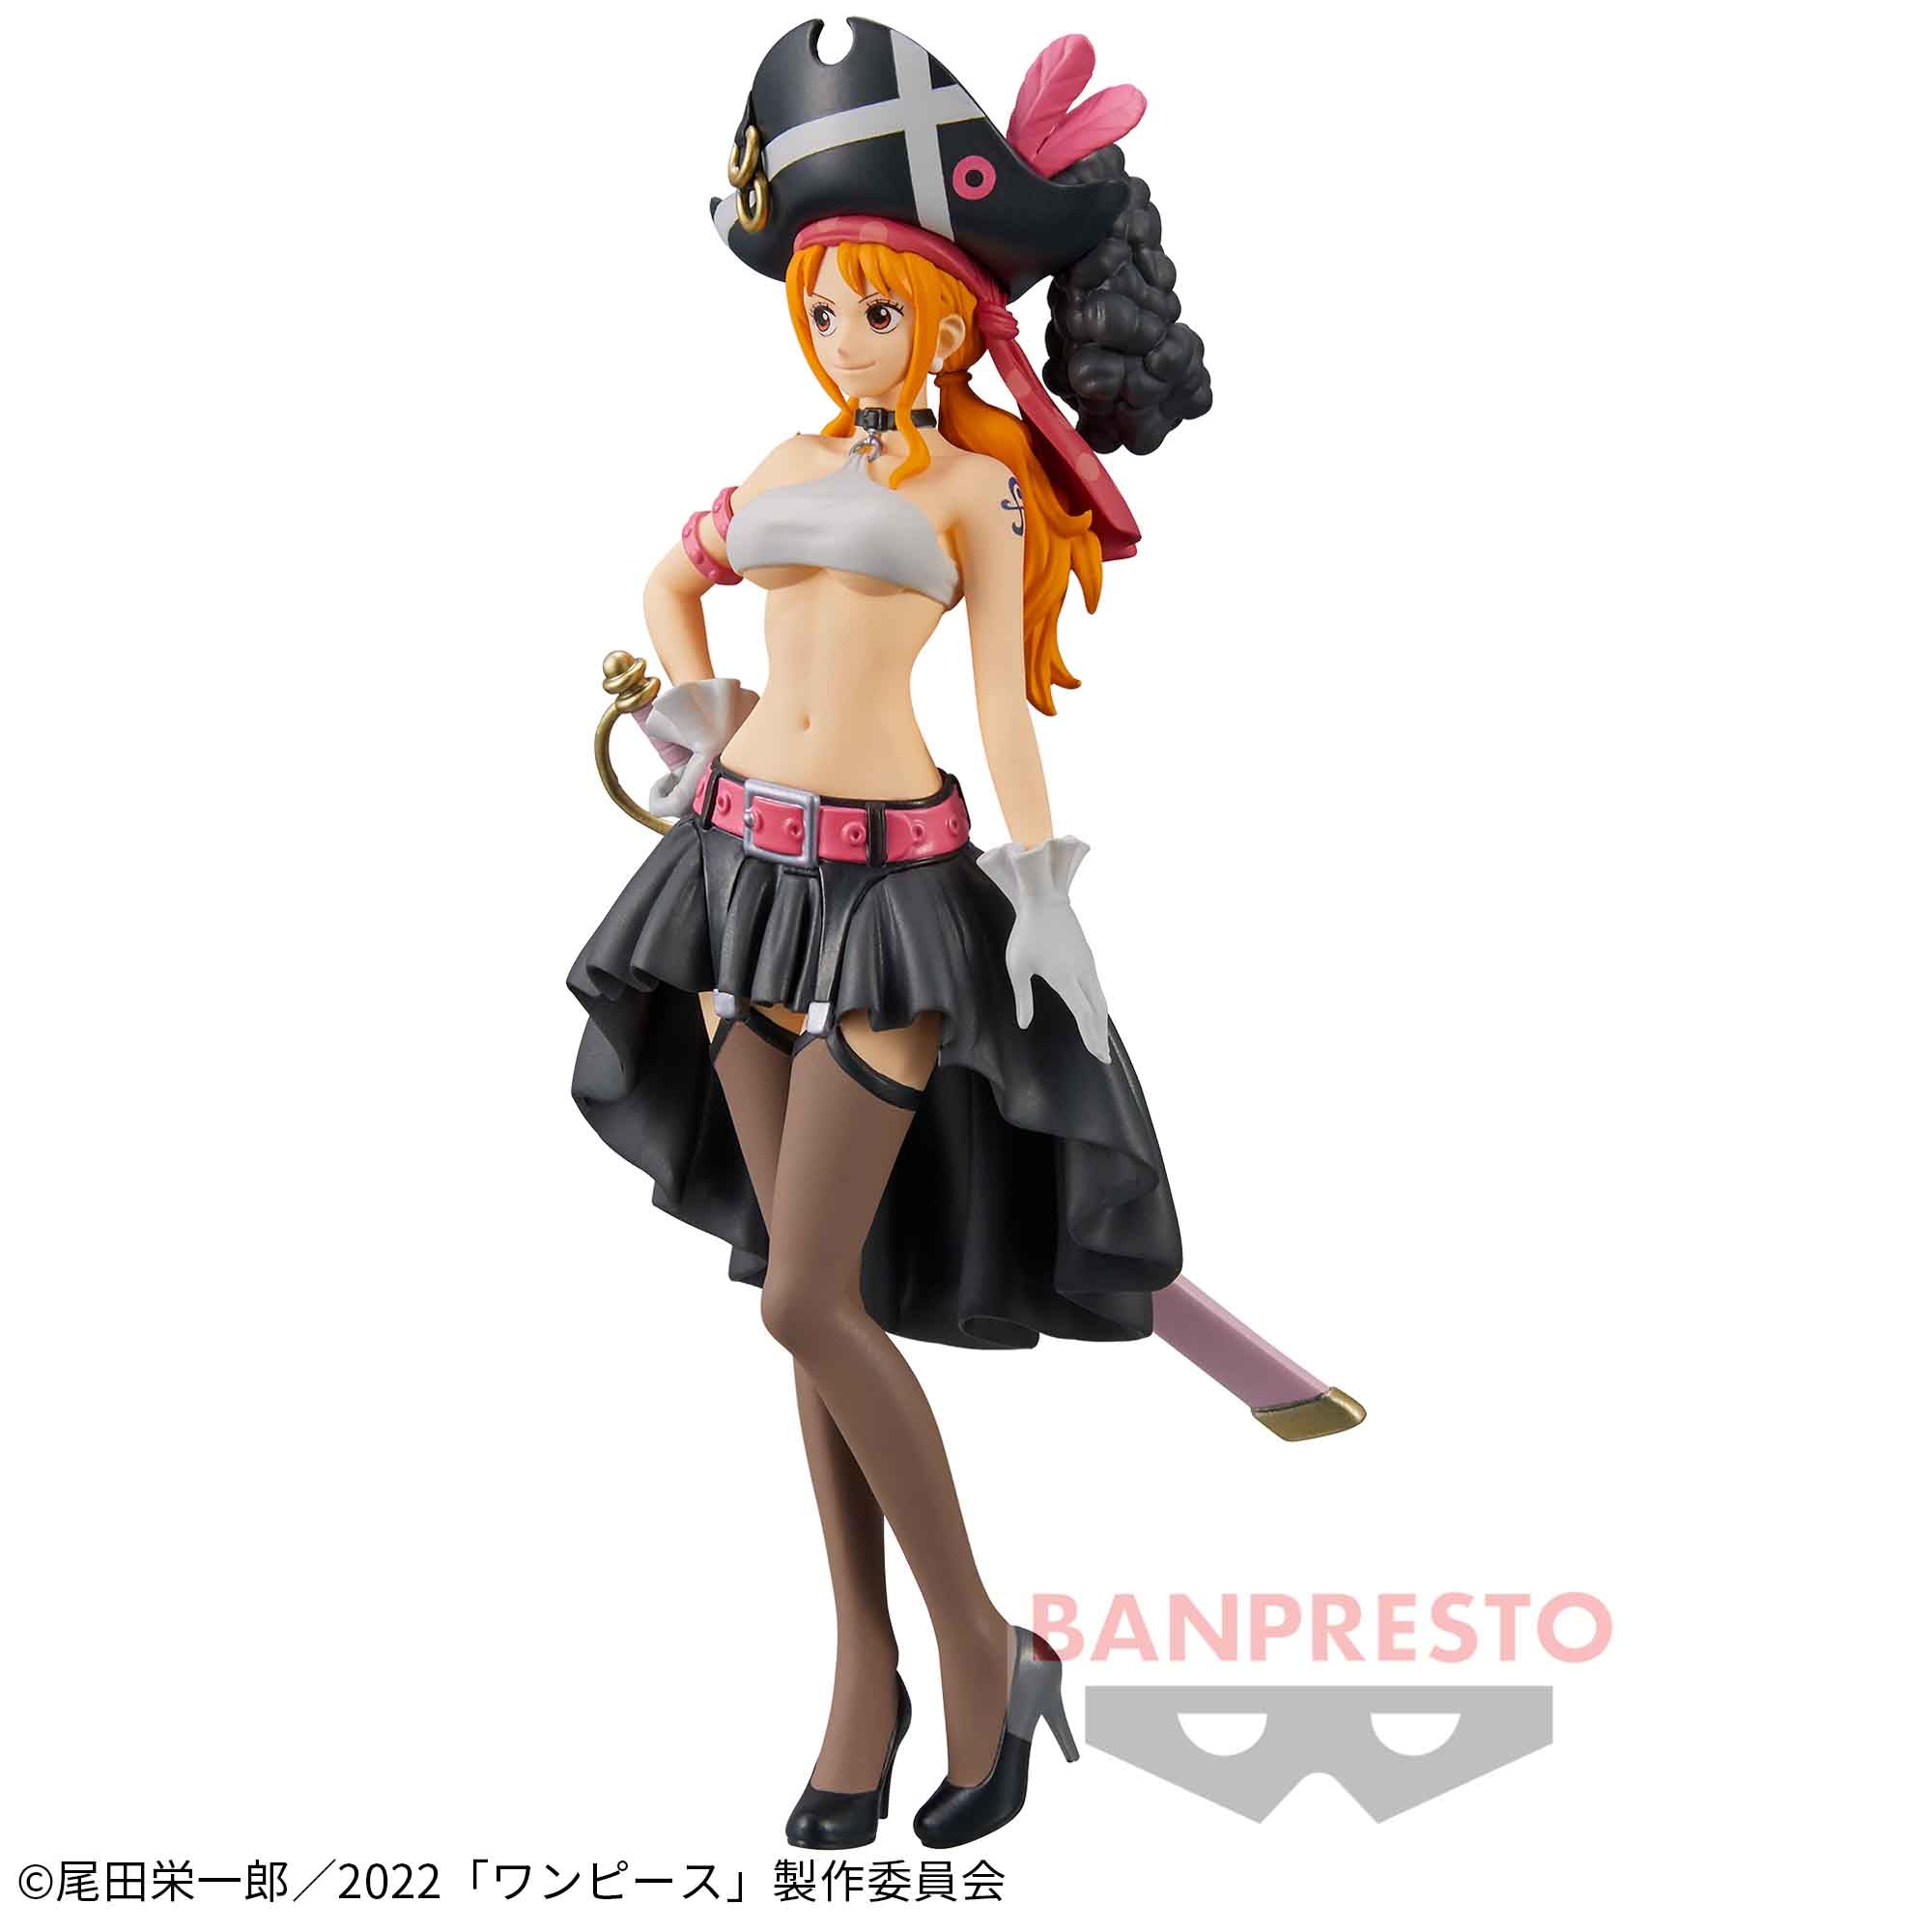 One Piece Film Red DXF The Grandline Lady Vol.3 Nami Figure for